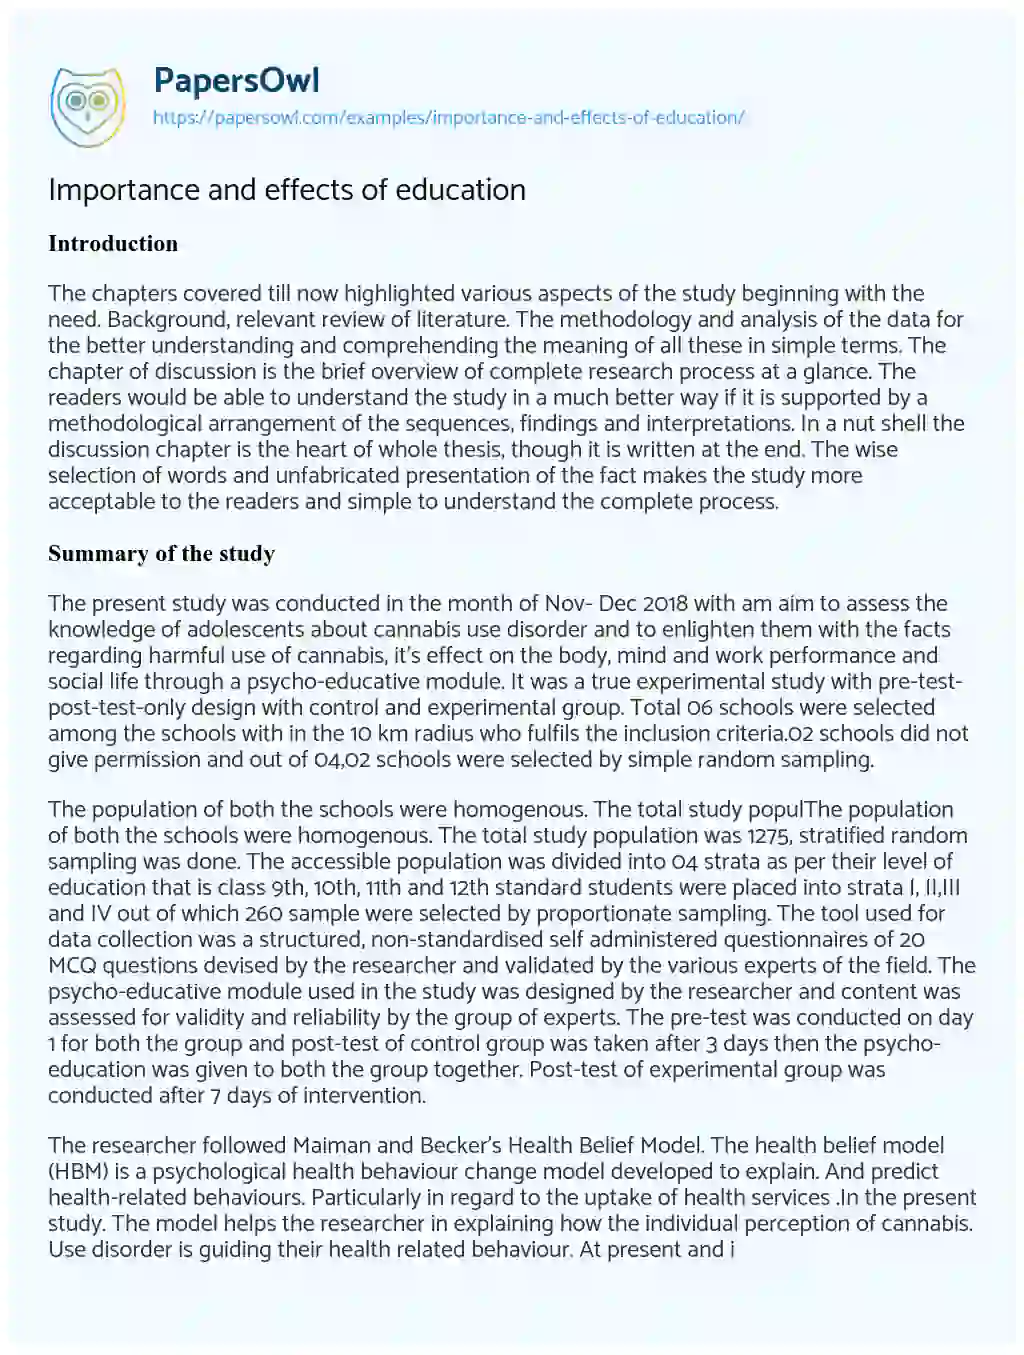 Essay on Importance and Effects of Education